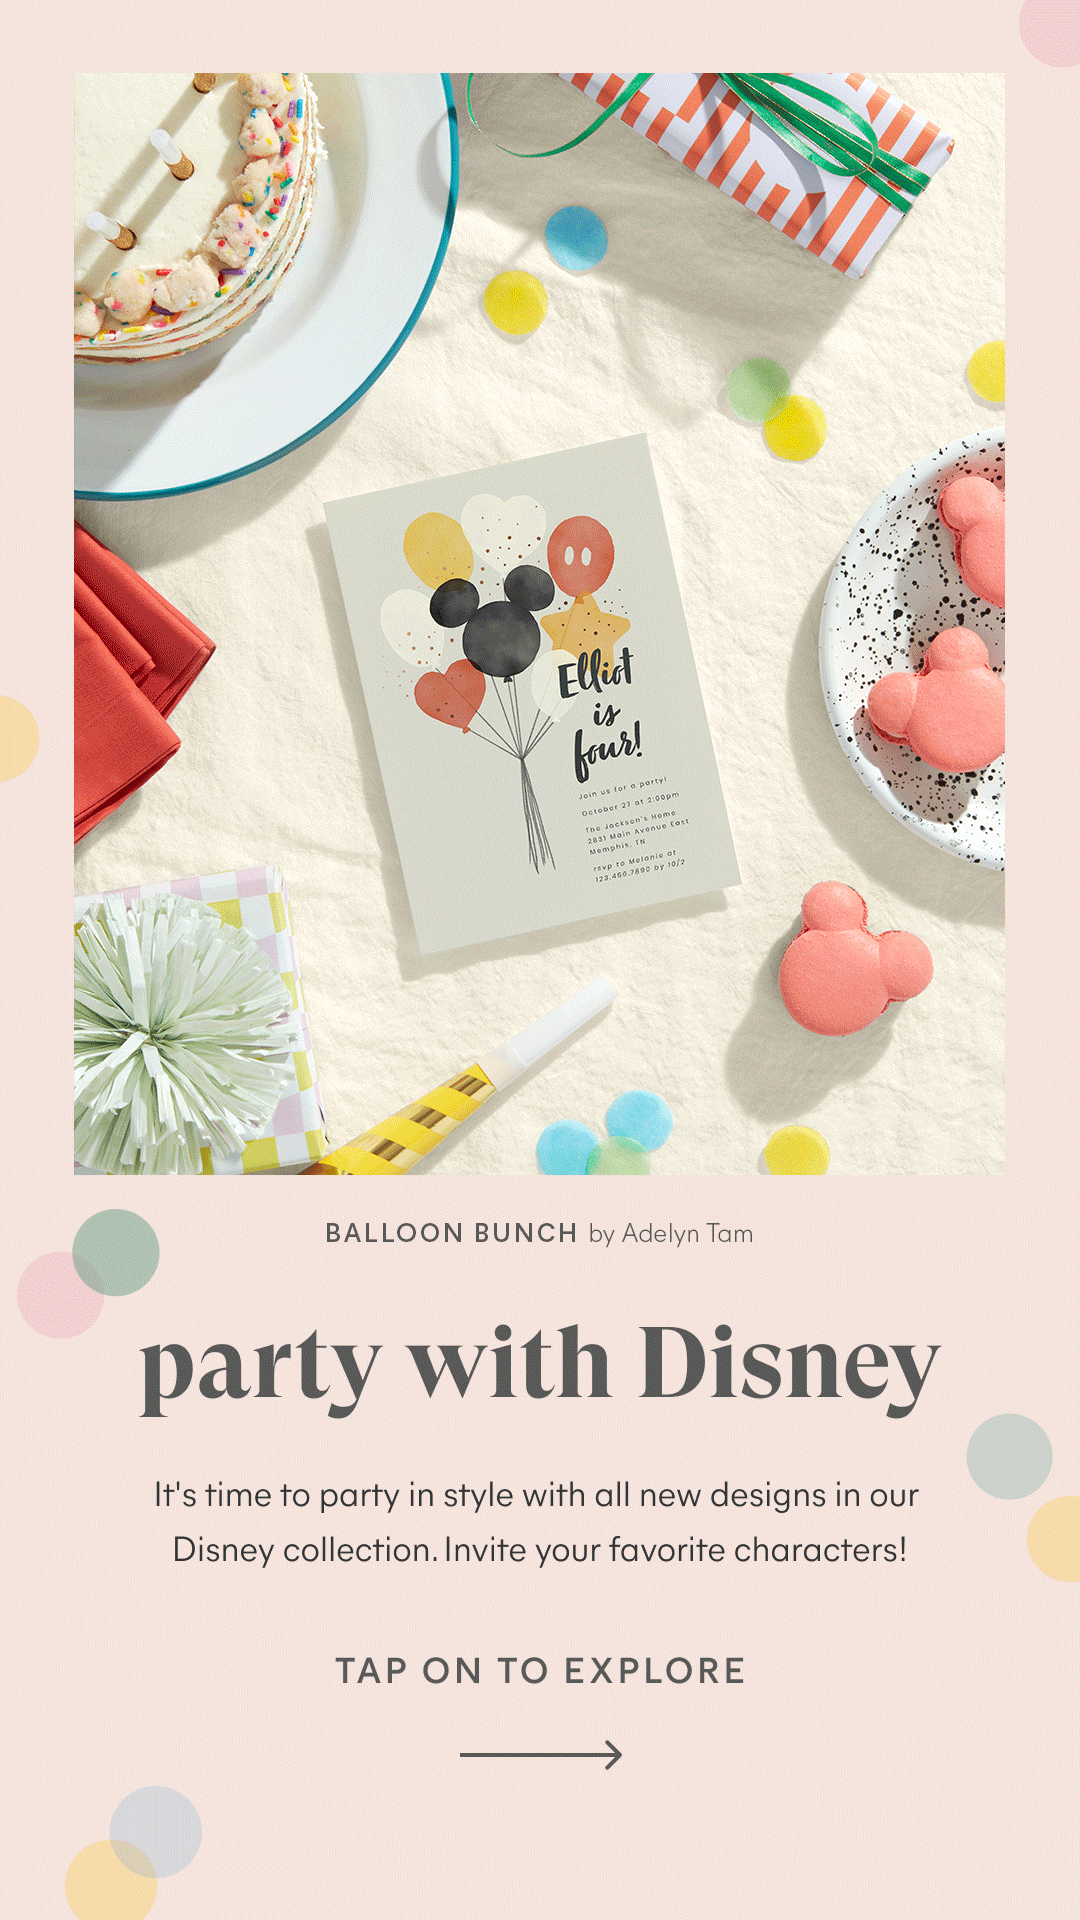  Partnership with Disney and Pixar to launch artist driven designs in Minted’s stationery business.  